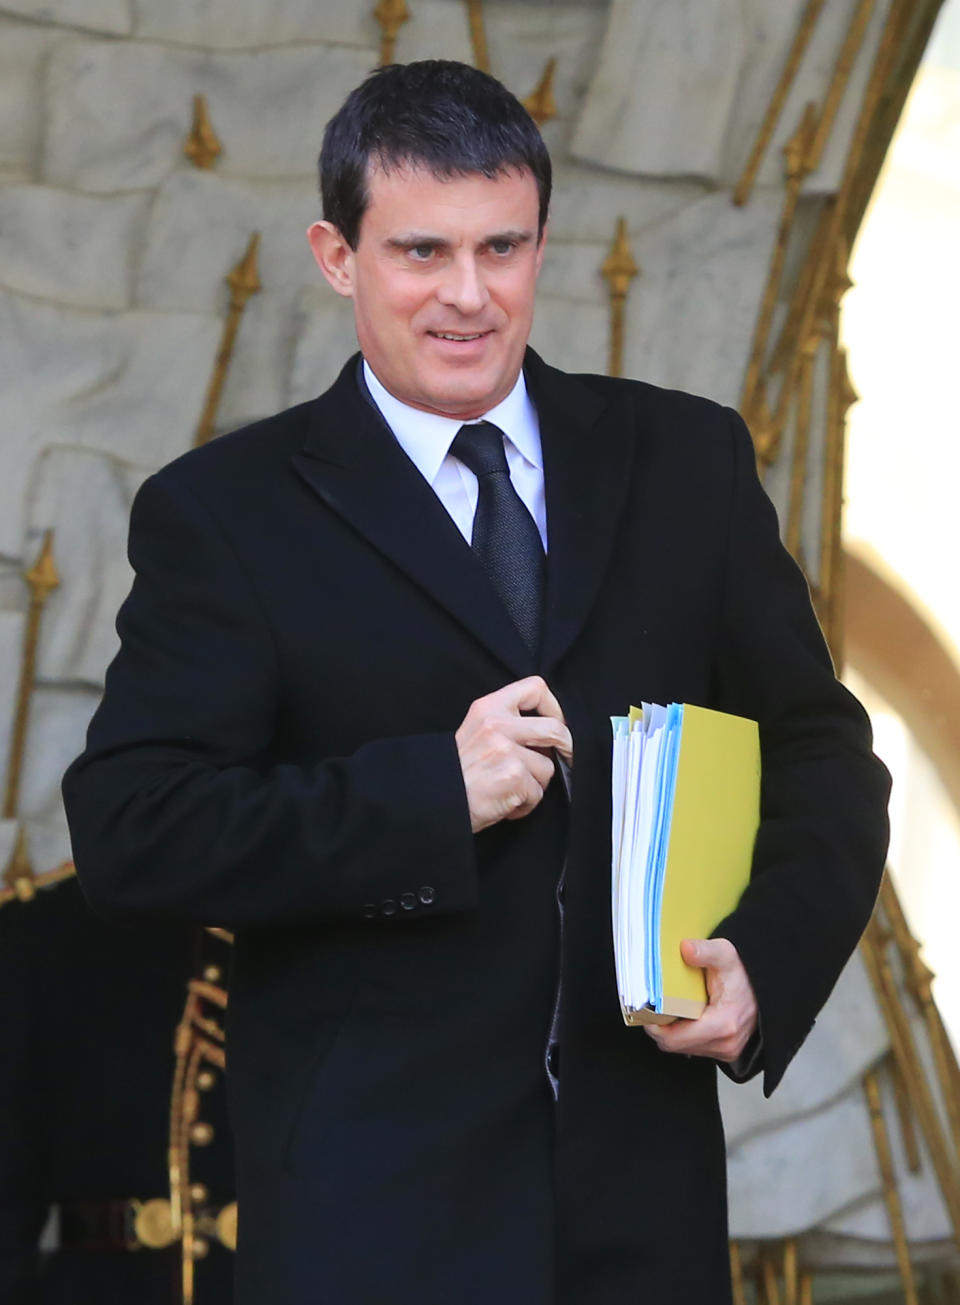 FILE - In this Jan. 8, 2014 file photo, French Interior Minister Manuel Valls leaves the Elysee Palace after the weekly cabinet meeting, in Paris. France's president has named 51-year-old Socialist Manuel Valls as the country's new prime minister, it was announced, Monday, March 31, 2014. In a prerecorded televised speech, Francois Hollande said Valls, the former interior minister, would lead a "combative government." (AP Photo/Jacques Brinon, File)